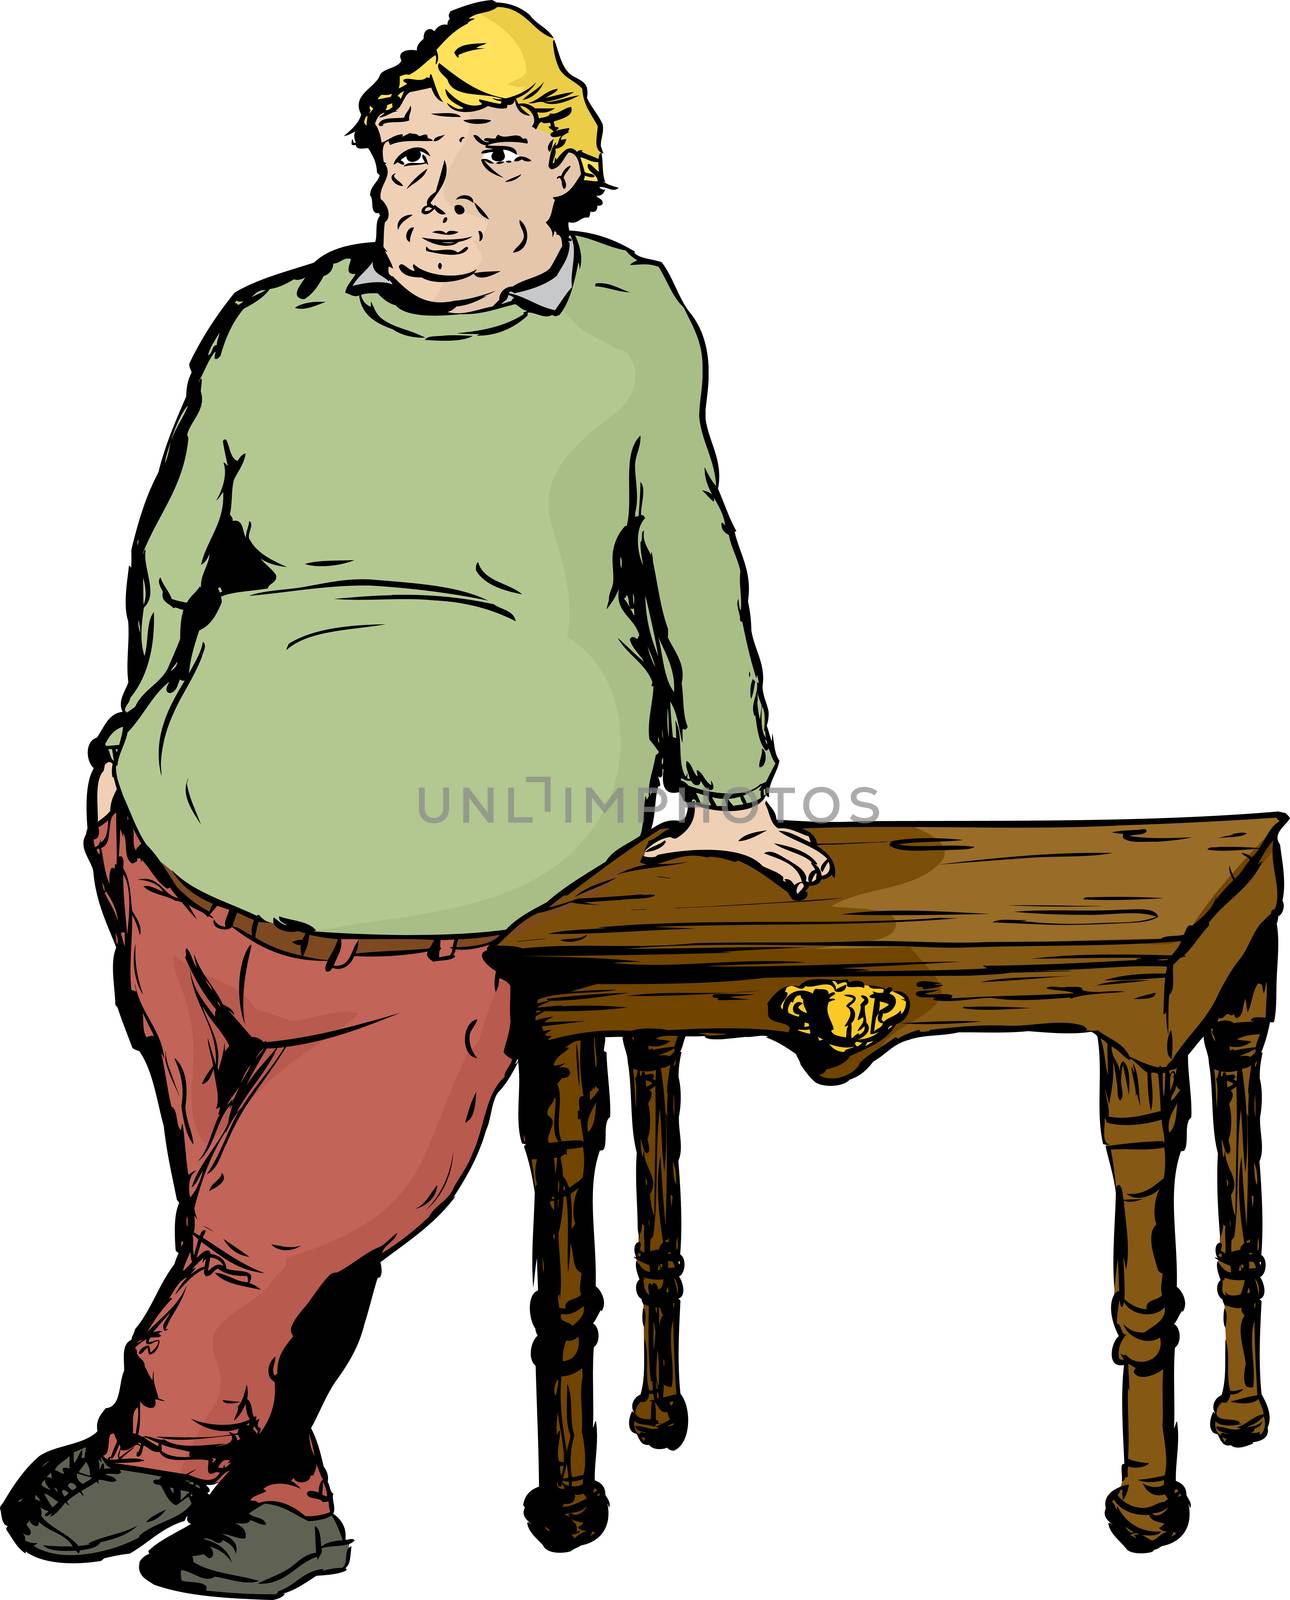 One blond overweight mature European male leaning on table with hand